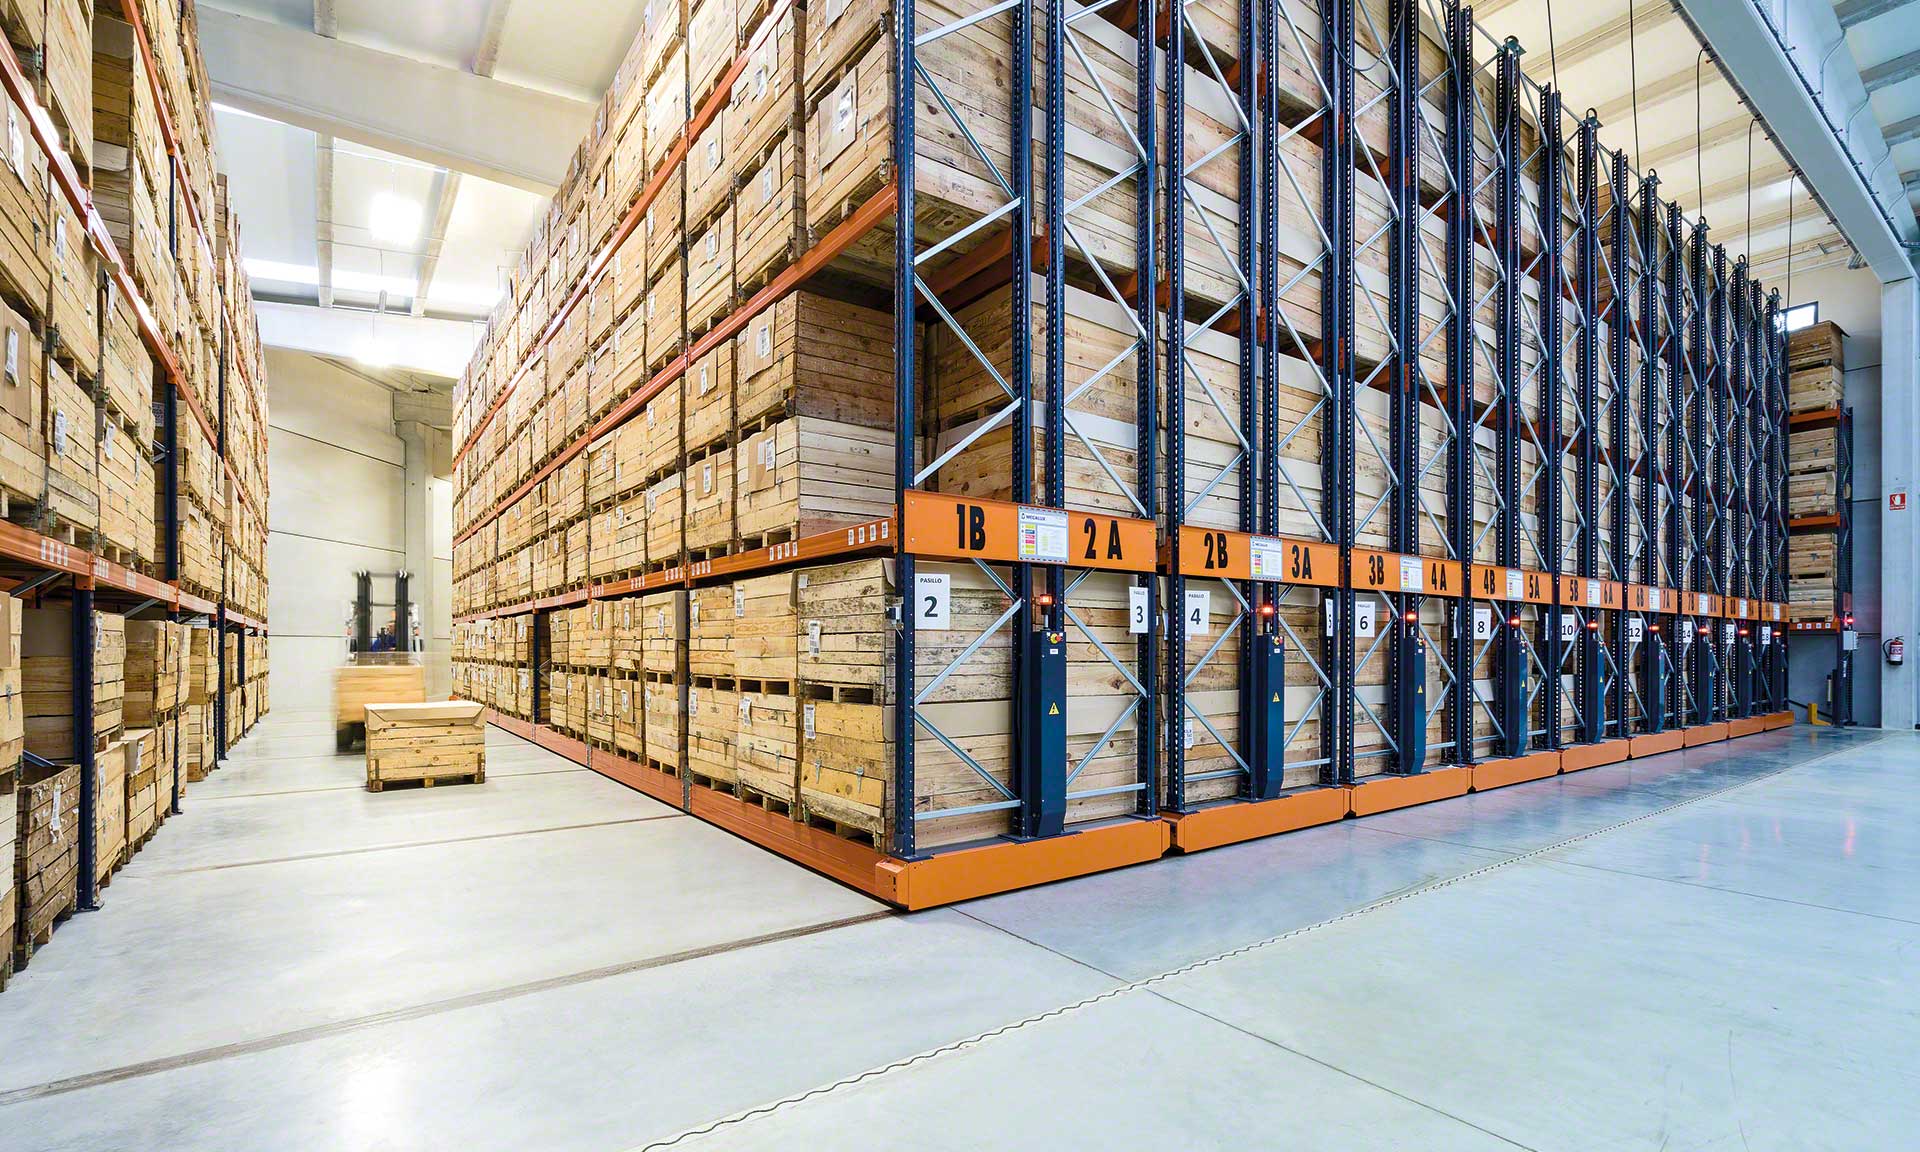 High-density storage expands storage capacity and frees up space in the warehouse